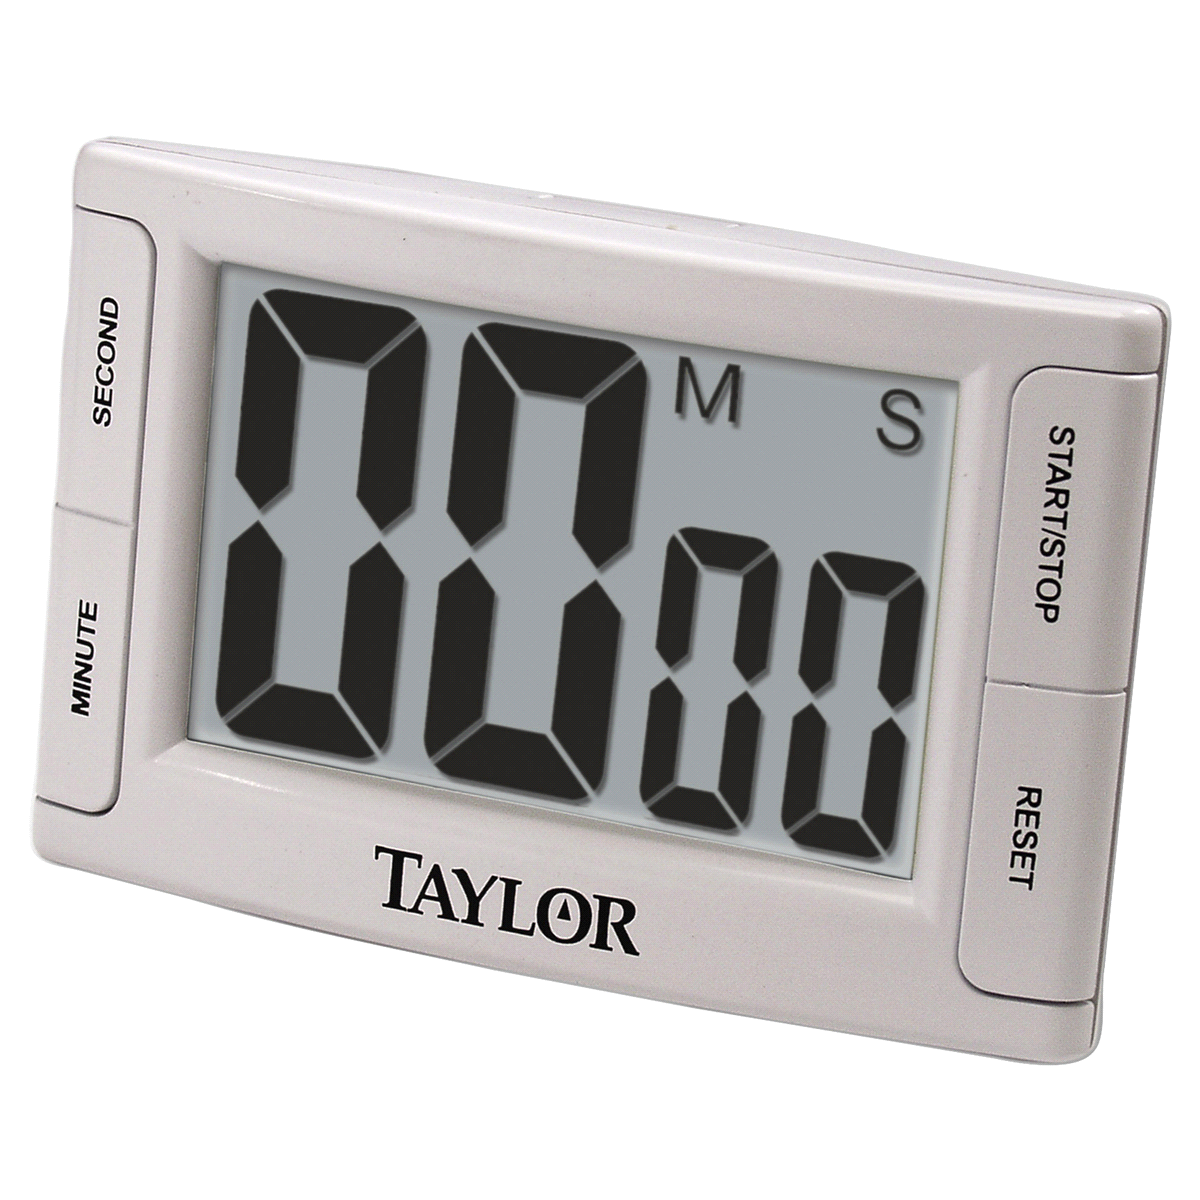 slide 1 of 1, Taylor Digital Timer with Jumbo Readout, 1 ct